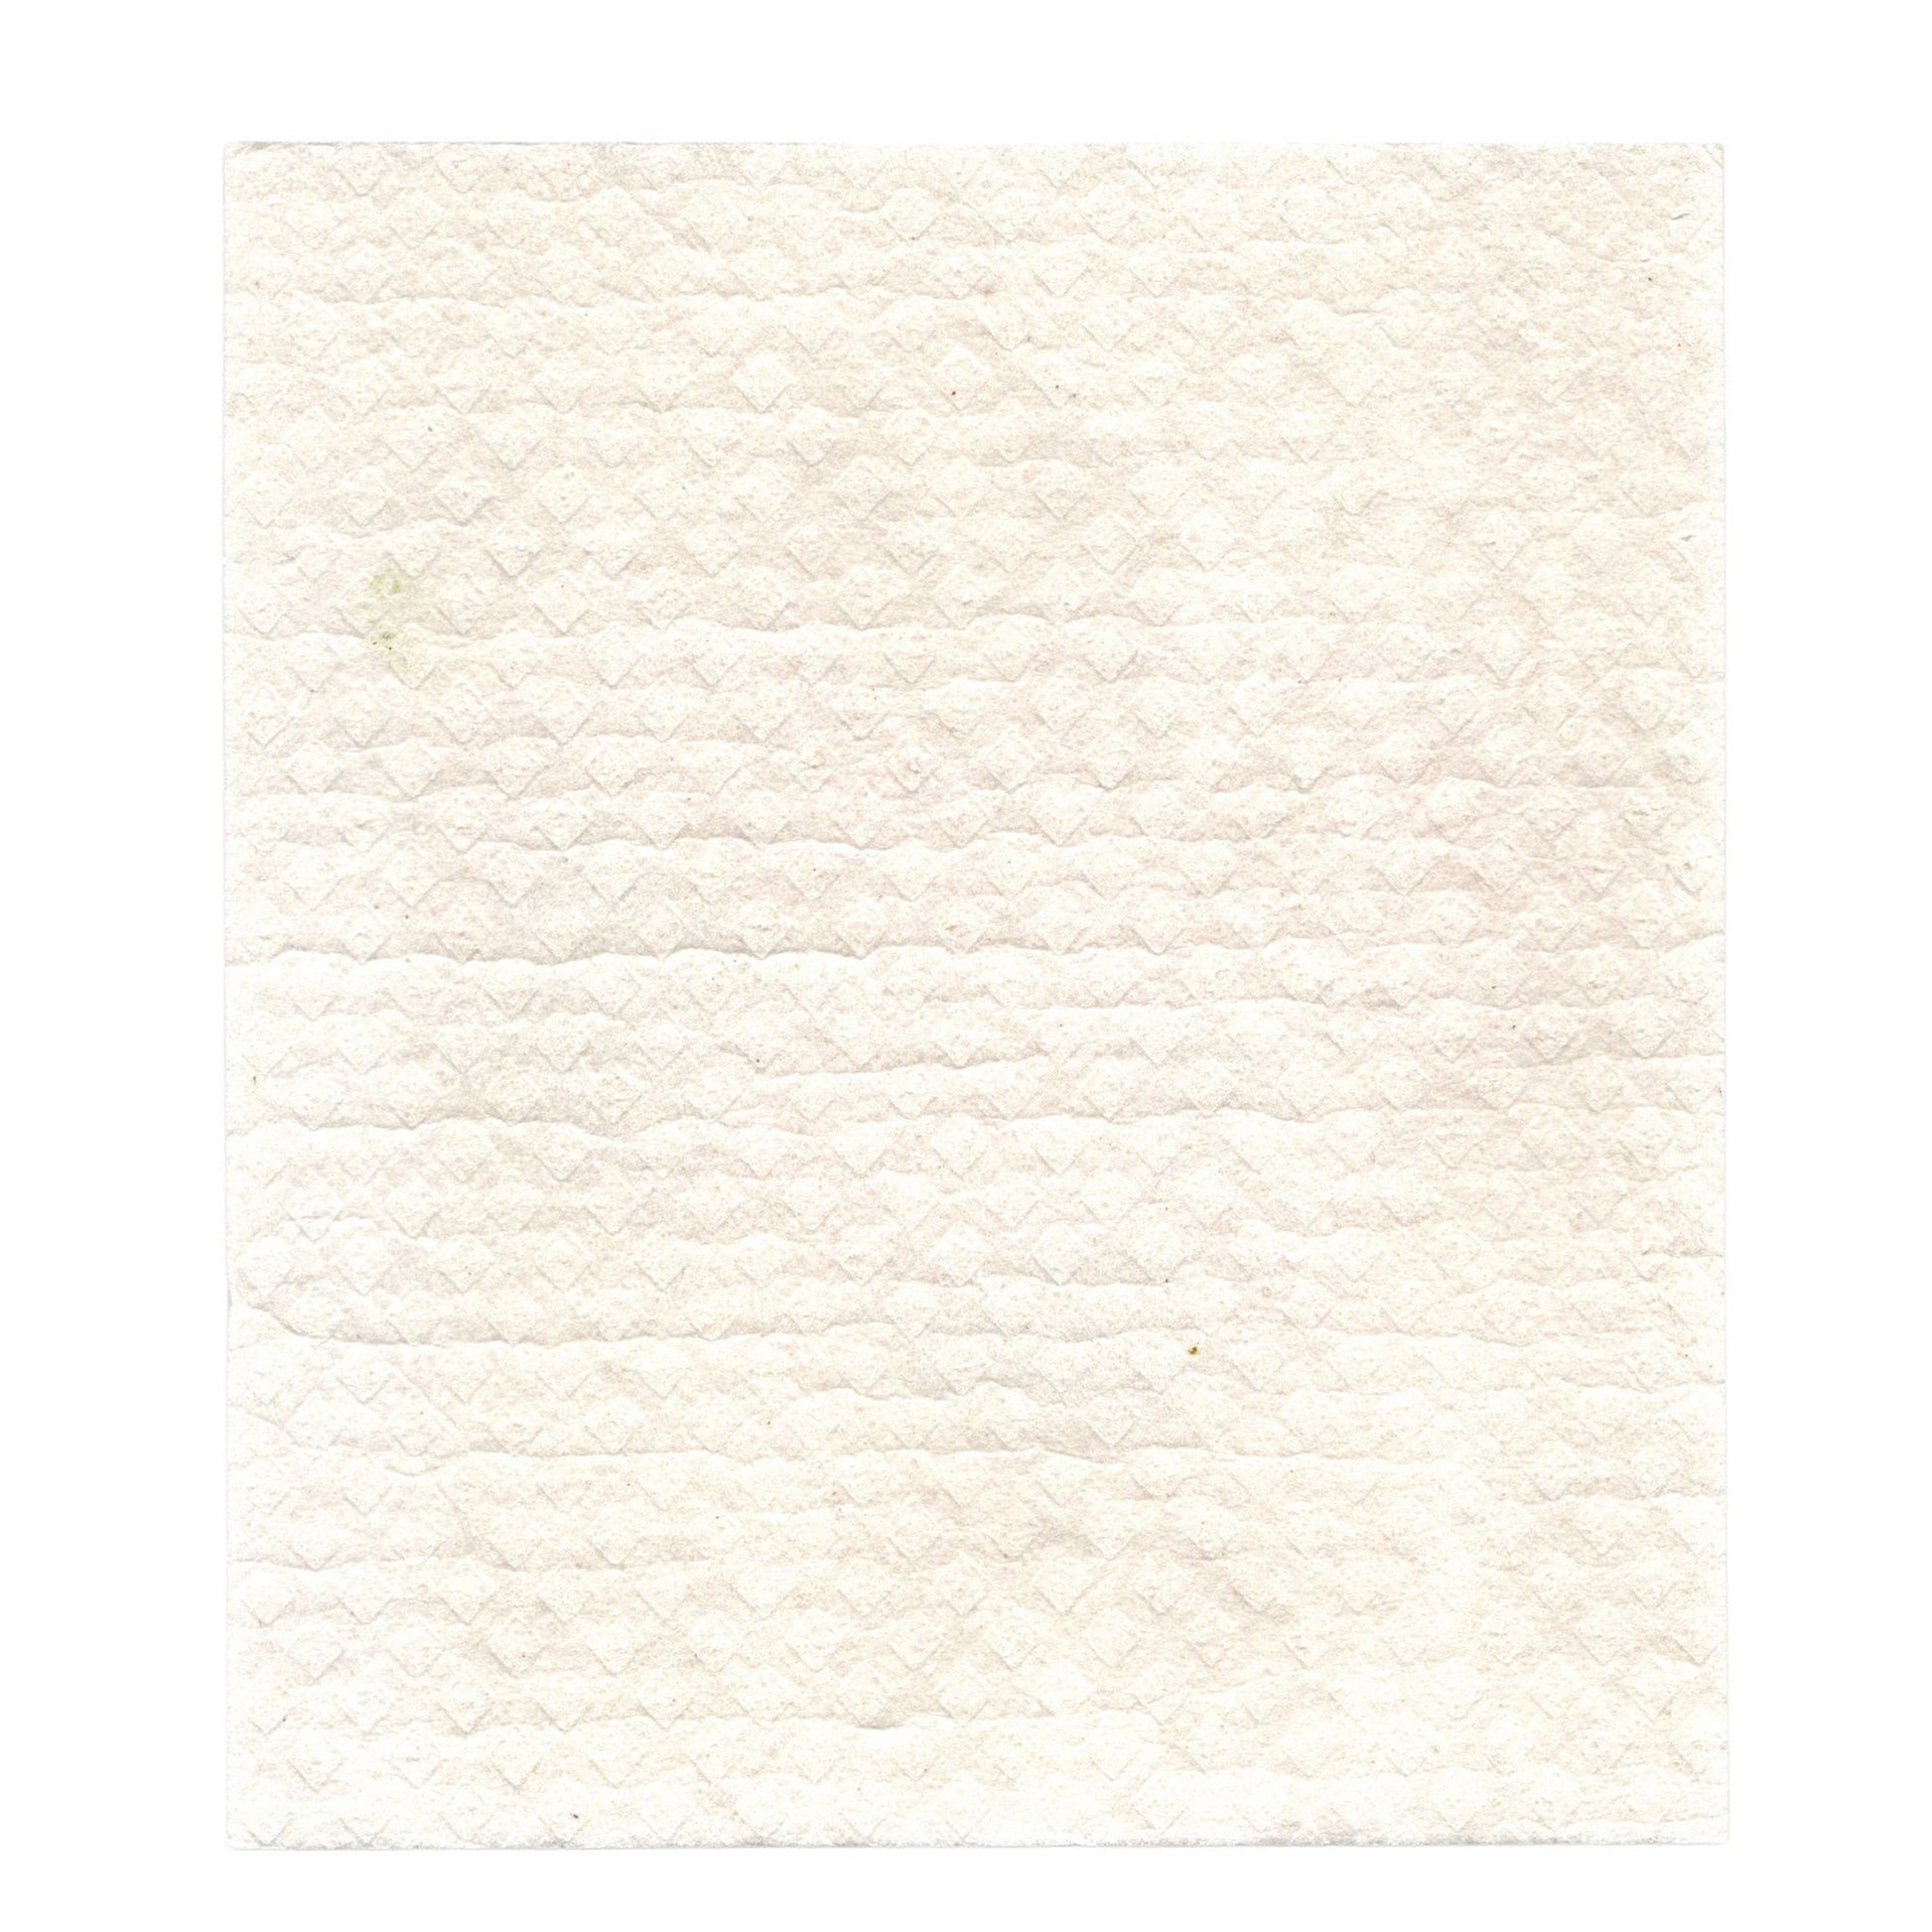 The white, textured back of a California Wildflowers Swedish Dishcloth.